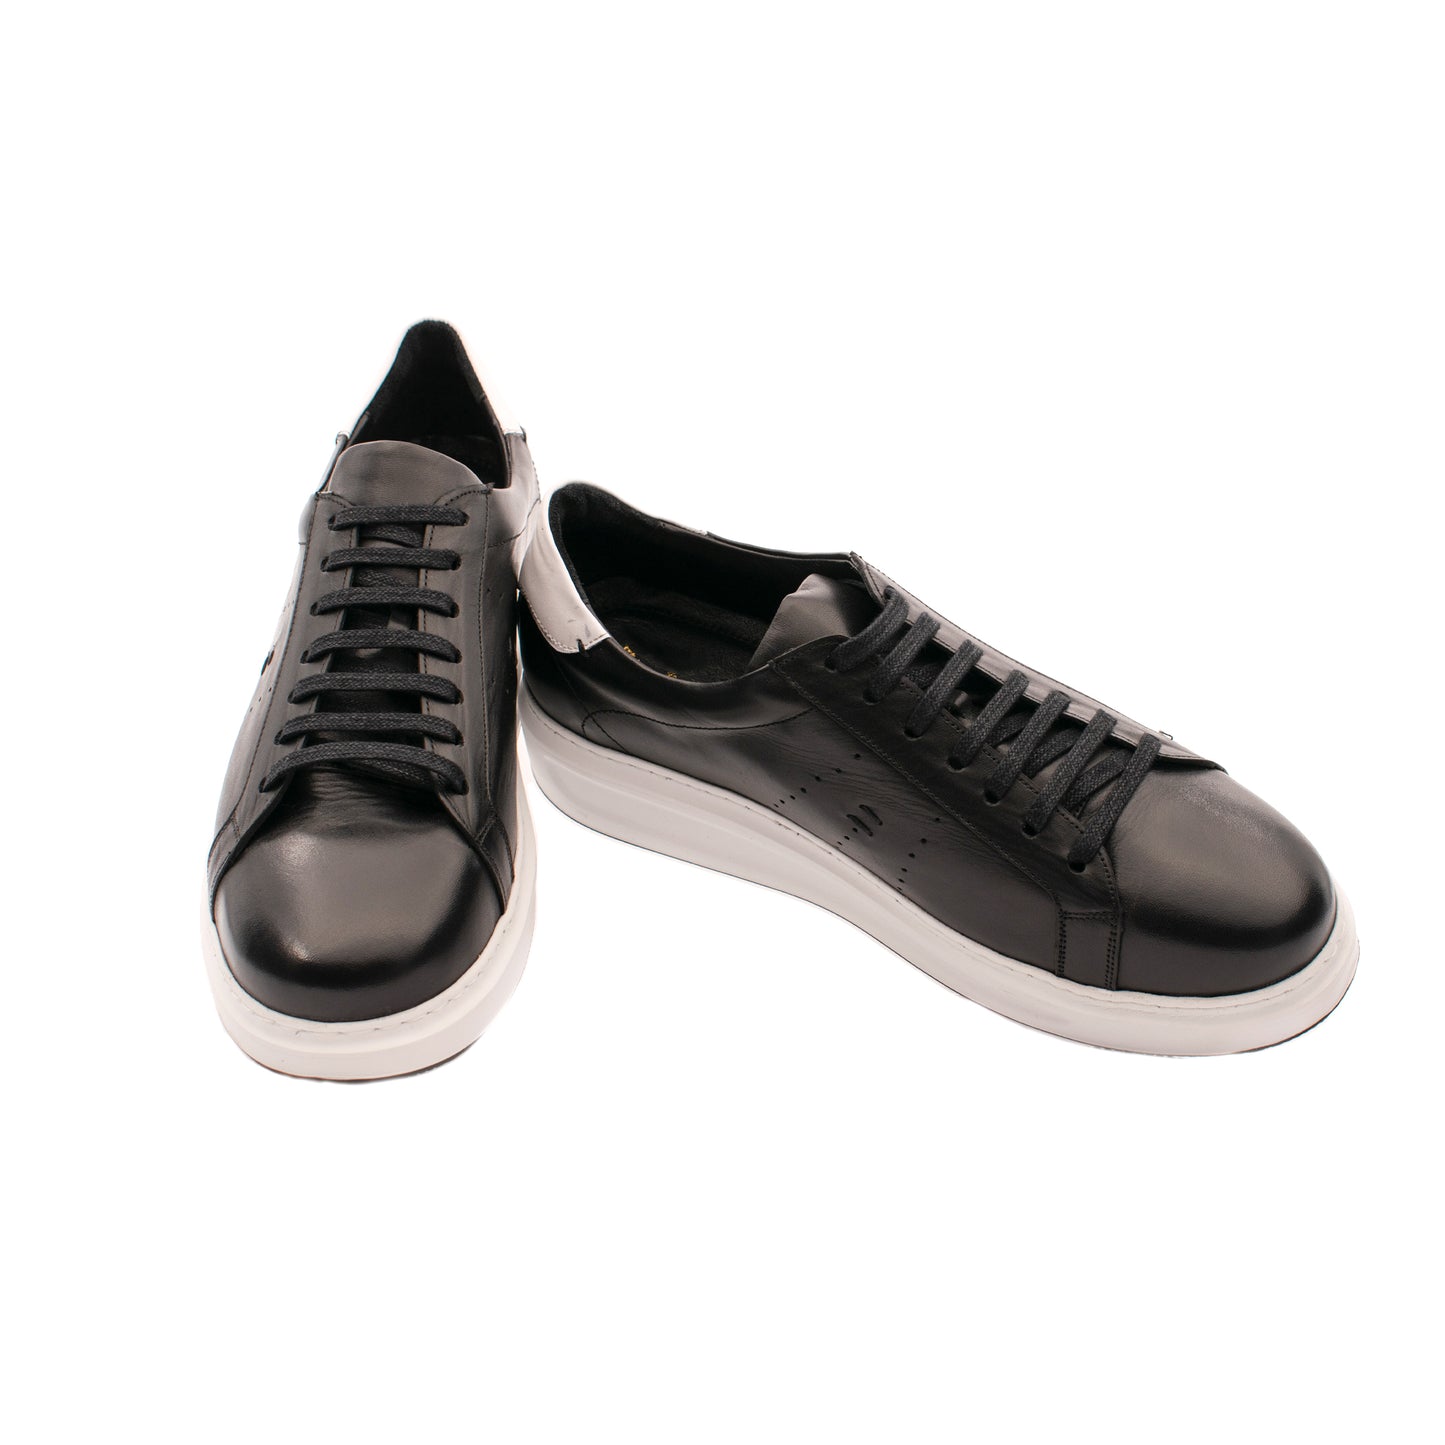 HCANSS CLASSIC LEATHER SNEAKER